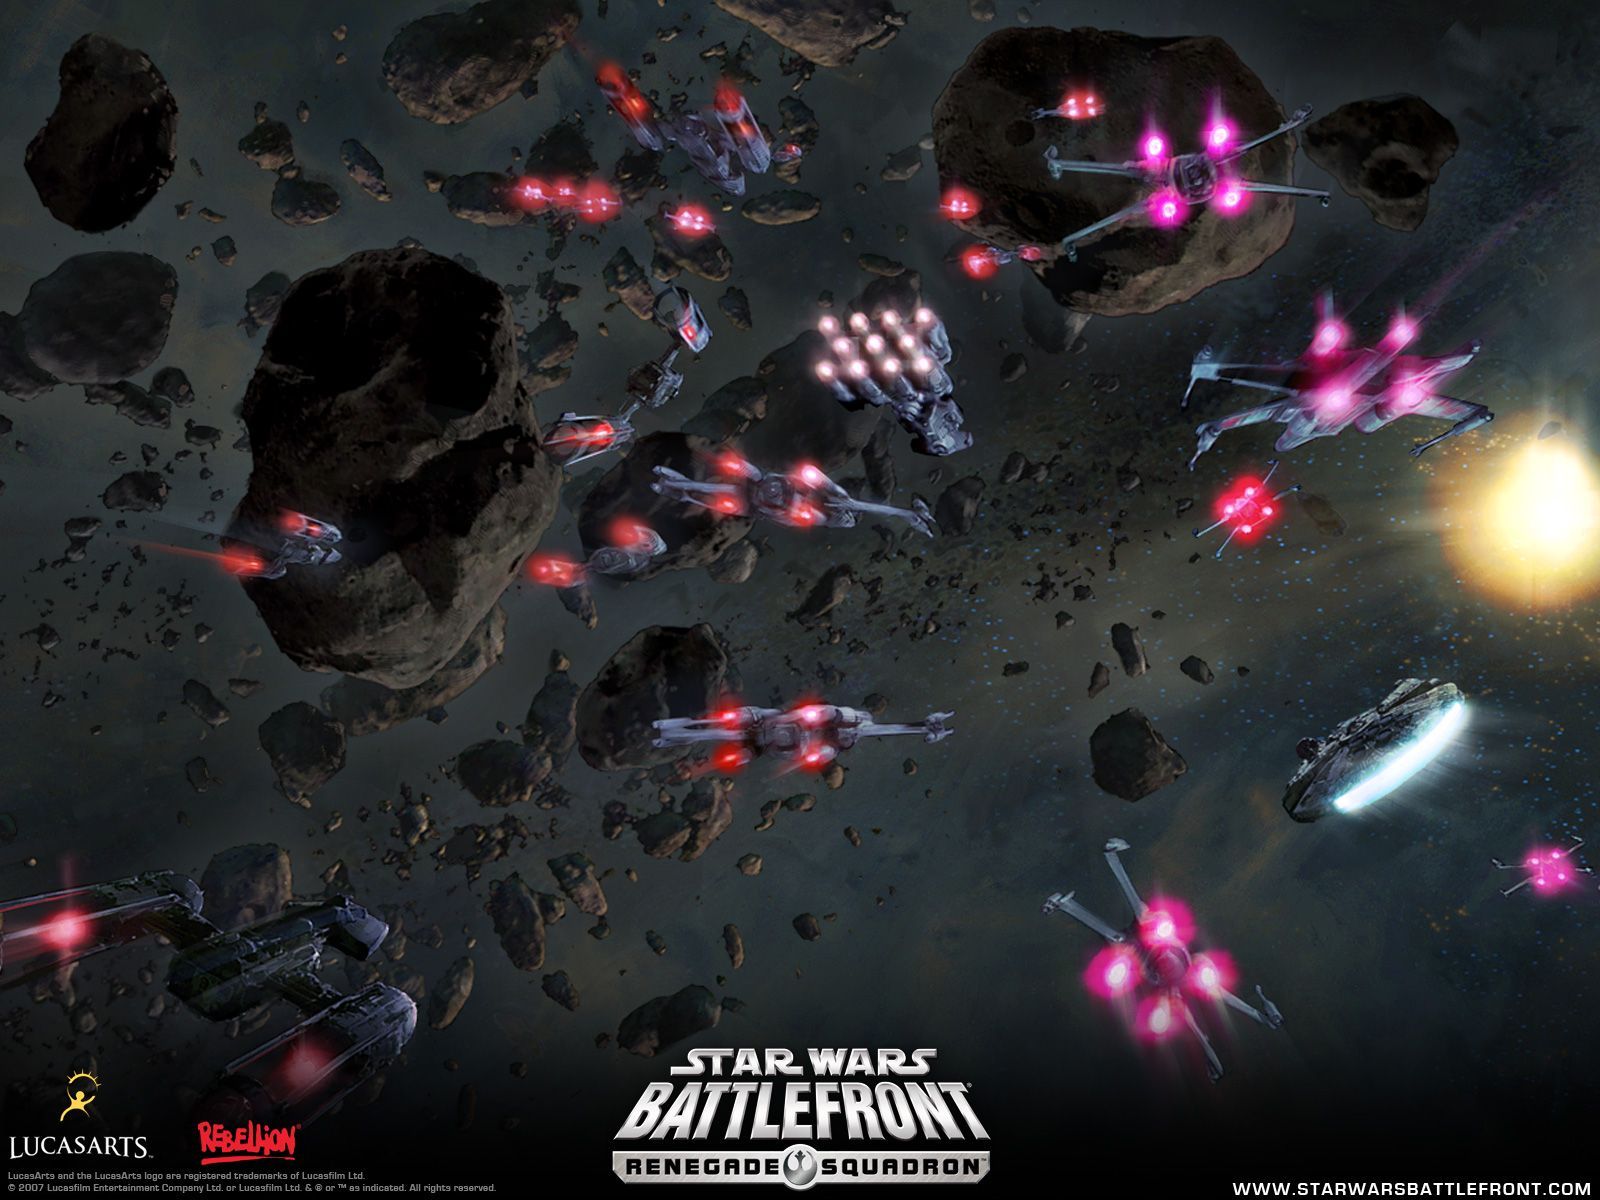 Star Wars Battlefront Renegade Squadron 6 GD46D740N7 1600×1200 « Awesome Wallpaper